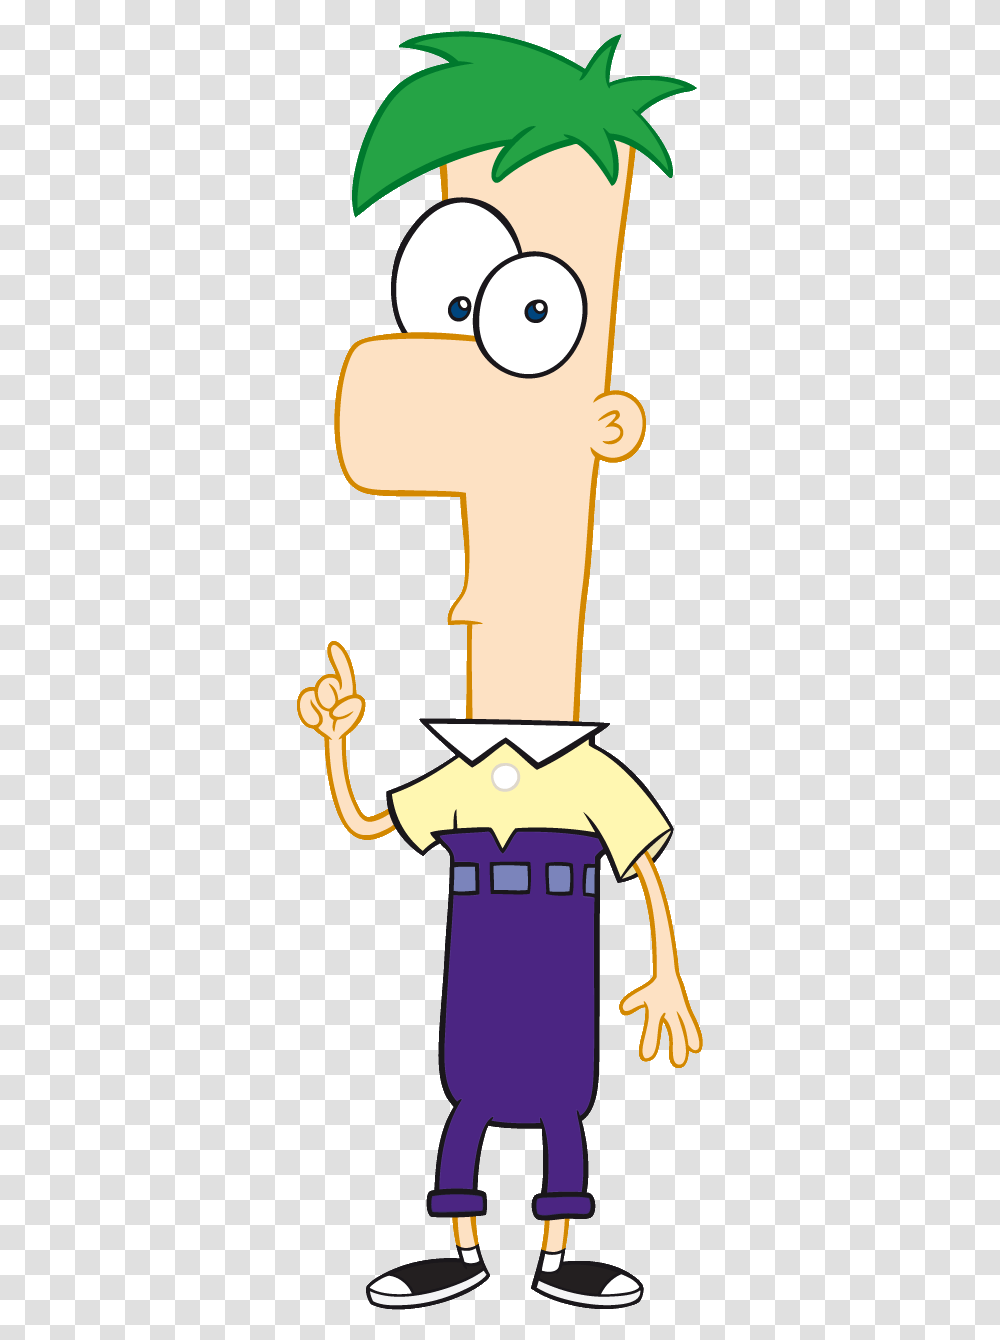 Cartoon City All Stars Brawl Universe Ferb From Phineas And Ferb, Number, Emblem Transparent Png